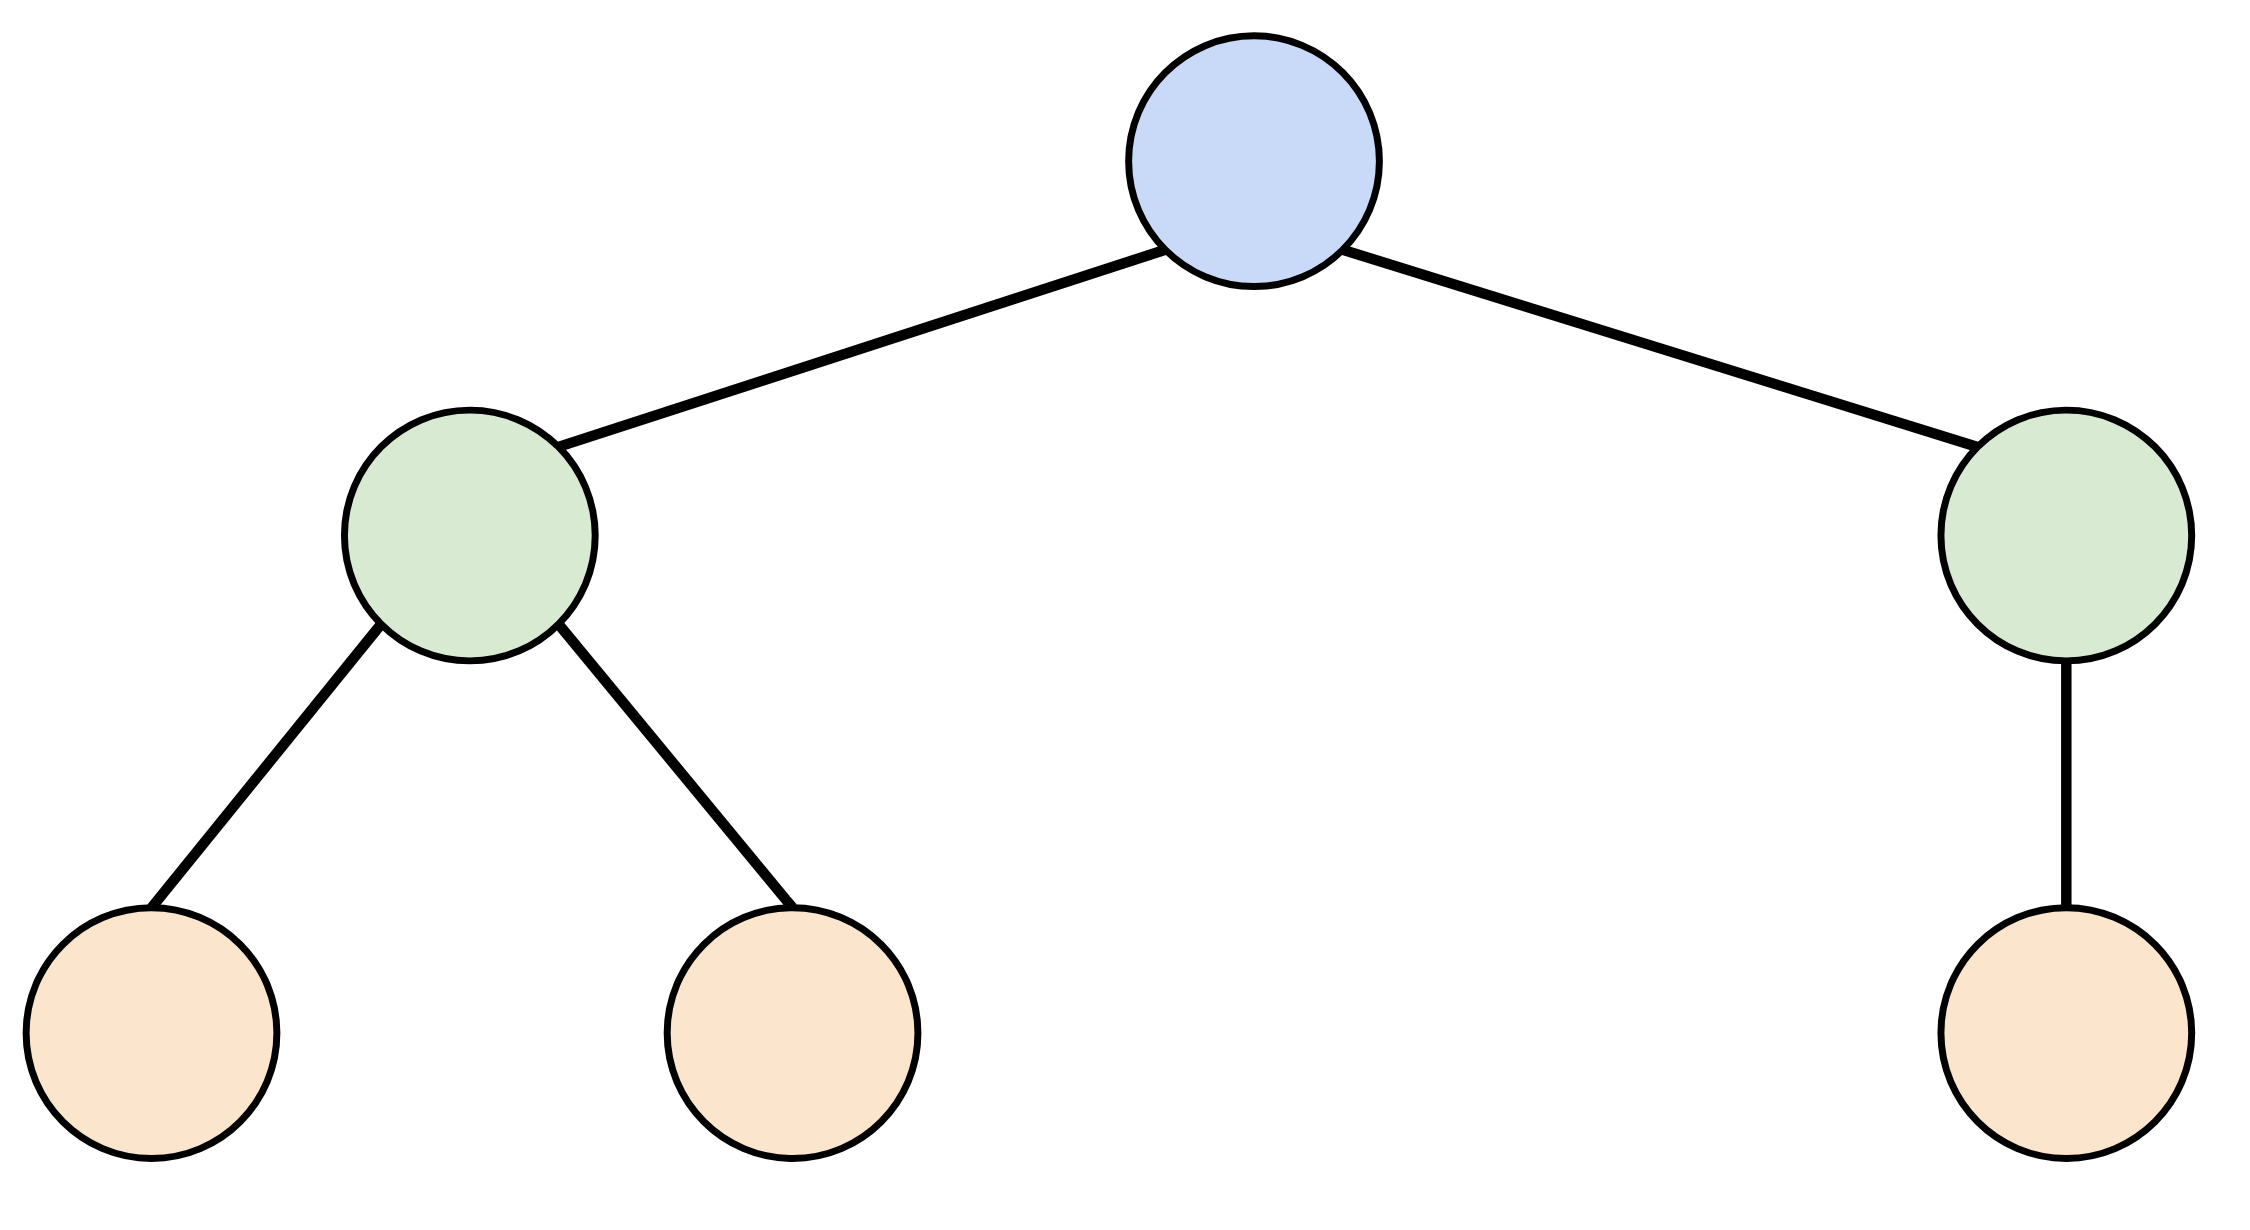 A tree representing the above dataflow graph